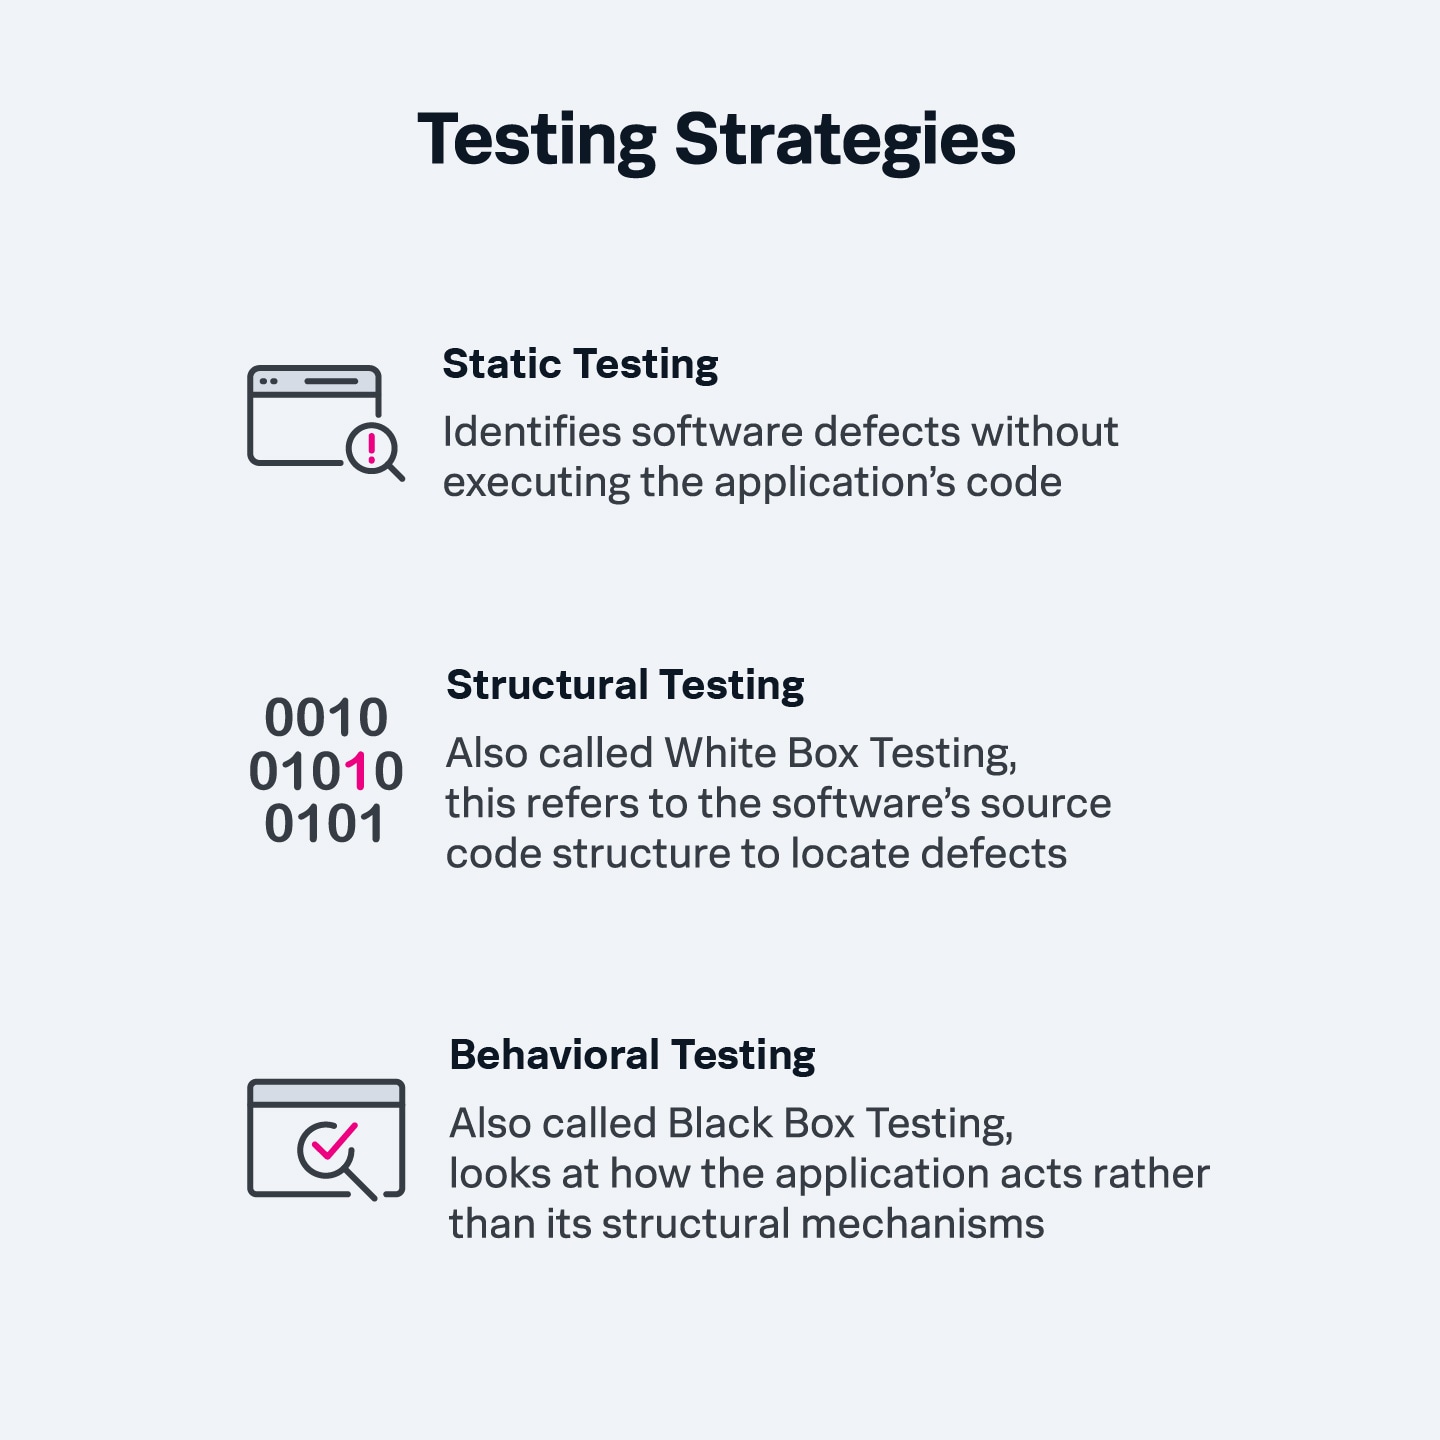 Different testing strategies arranged in a chart.